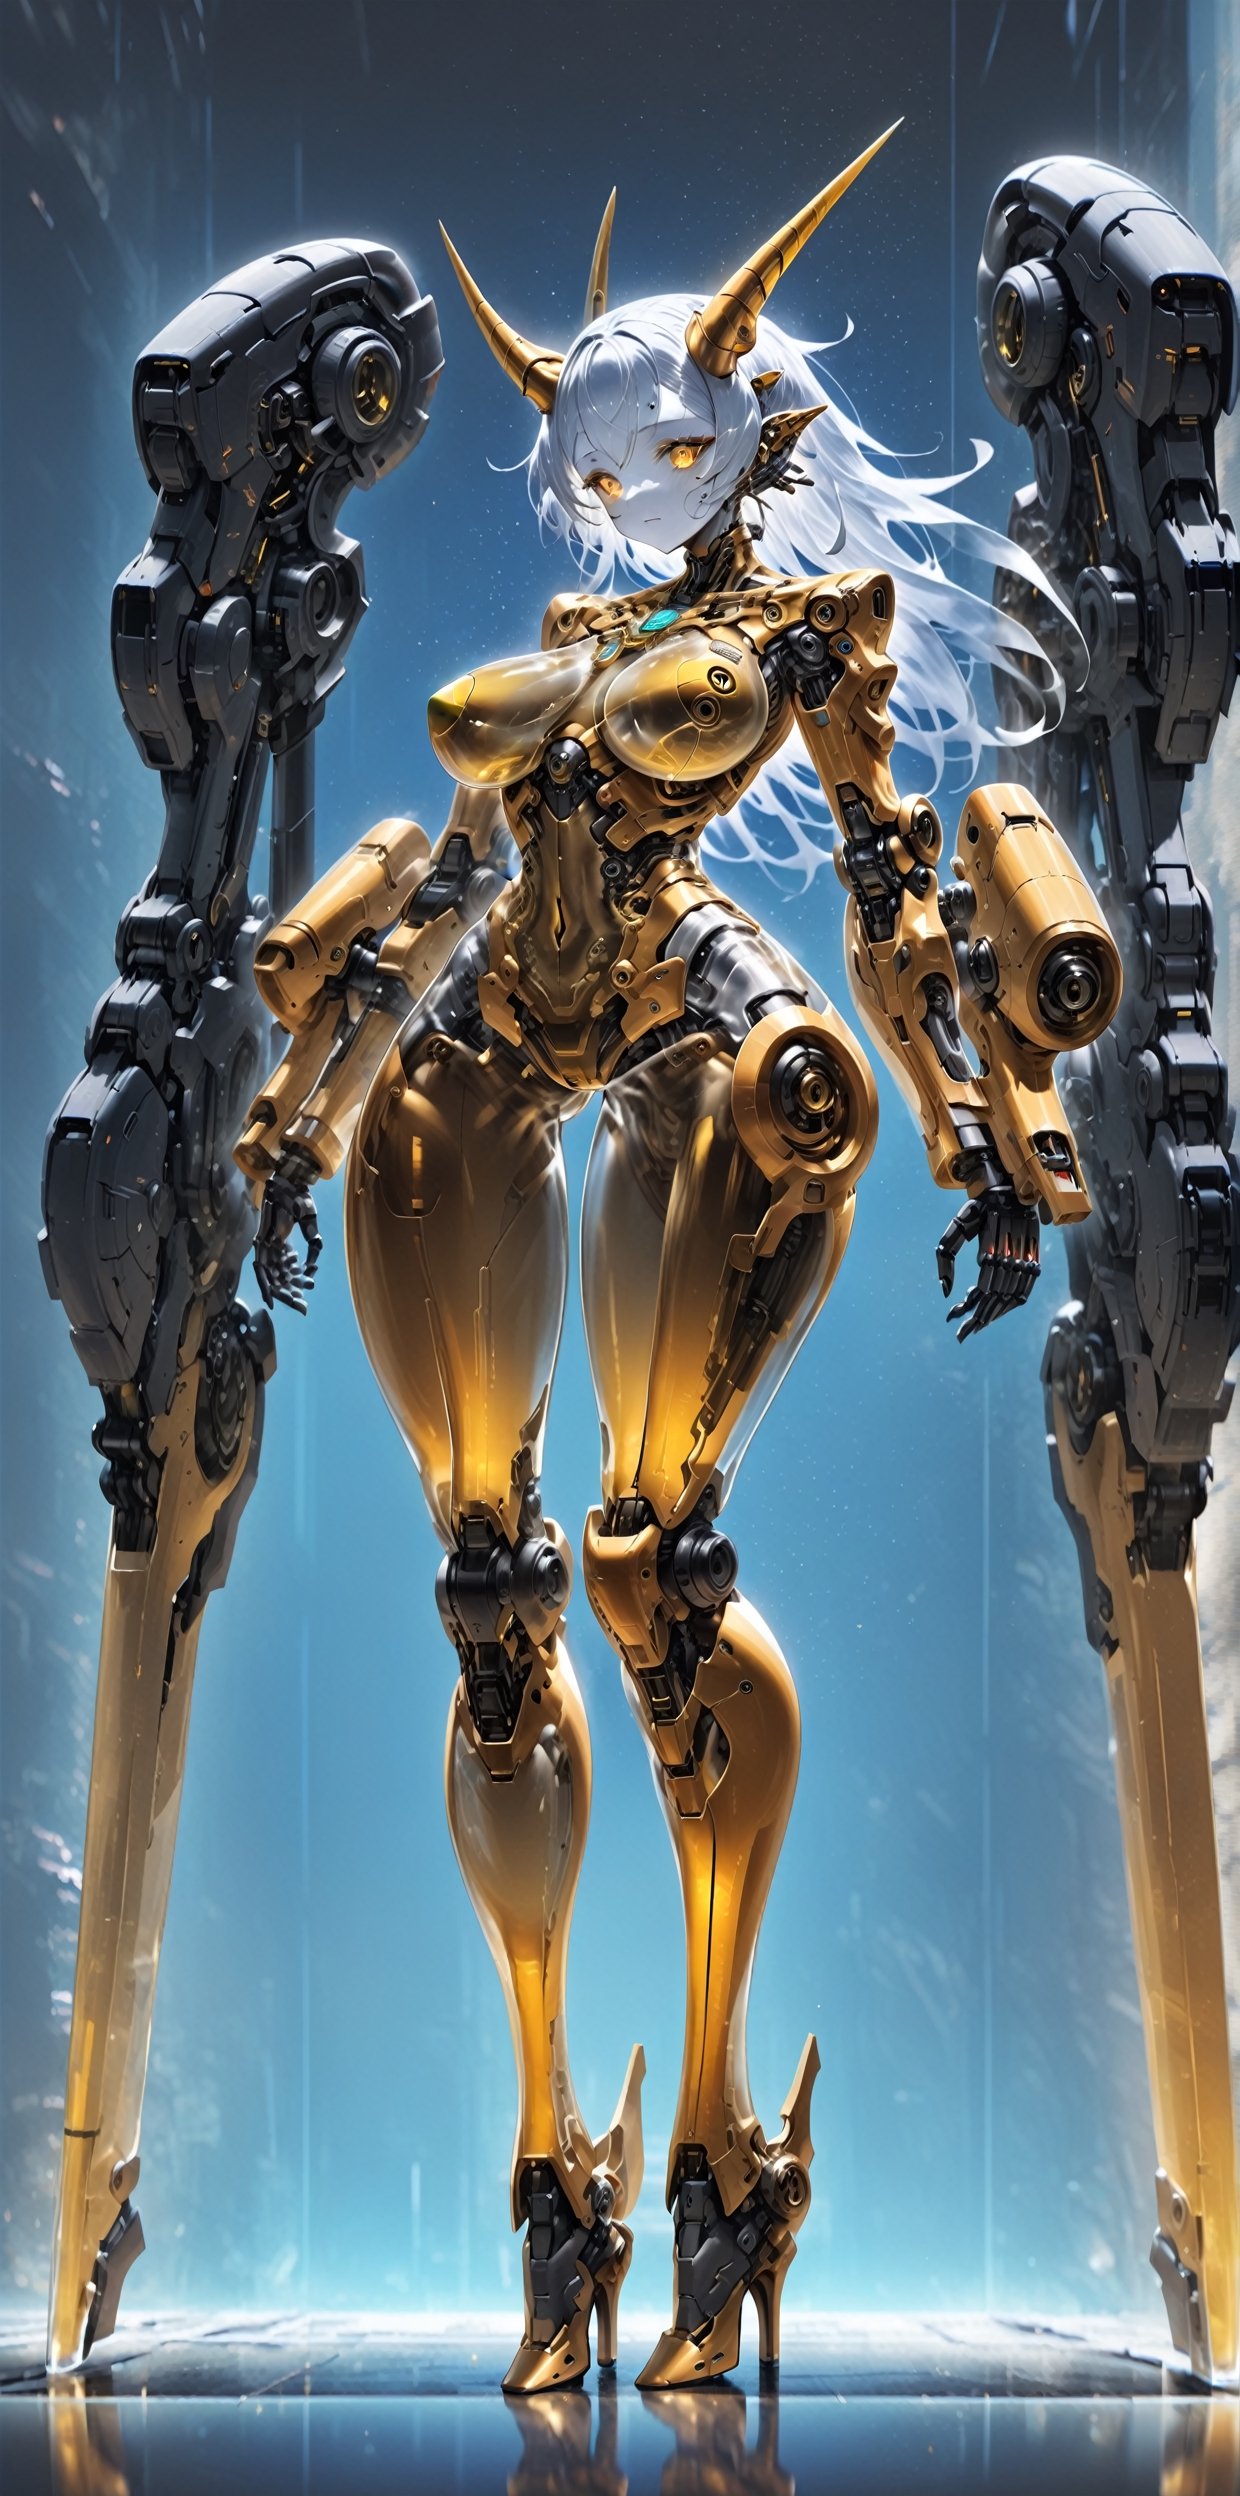 albino robot Girl, (long intricate horns:1.2),Giant weapon arms, adorned with ((transparent body parts)),(gold  breast), revealing the intricate machinery inside, giant robotic weapon, smooth and angular design despite transparent parts, pulsating energy and intricate circuitry visible through transparent body parts,high heels,Elegant curvaceous beauty,robot, mechanical arms,Glass Elements,Clear Glass Skin,hubg_mecha_girl,skinbodysuit,Blue Backlight,cyborg,bodysuit,breast bags,Energy light particle mecha